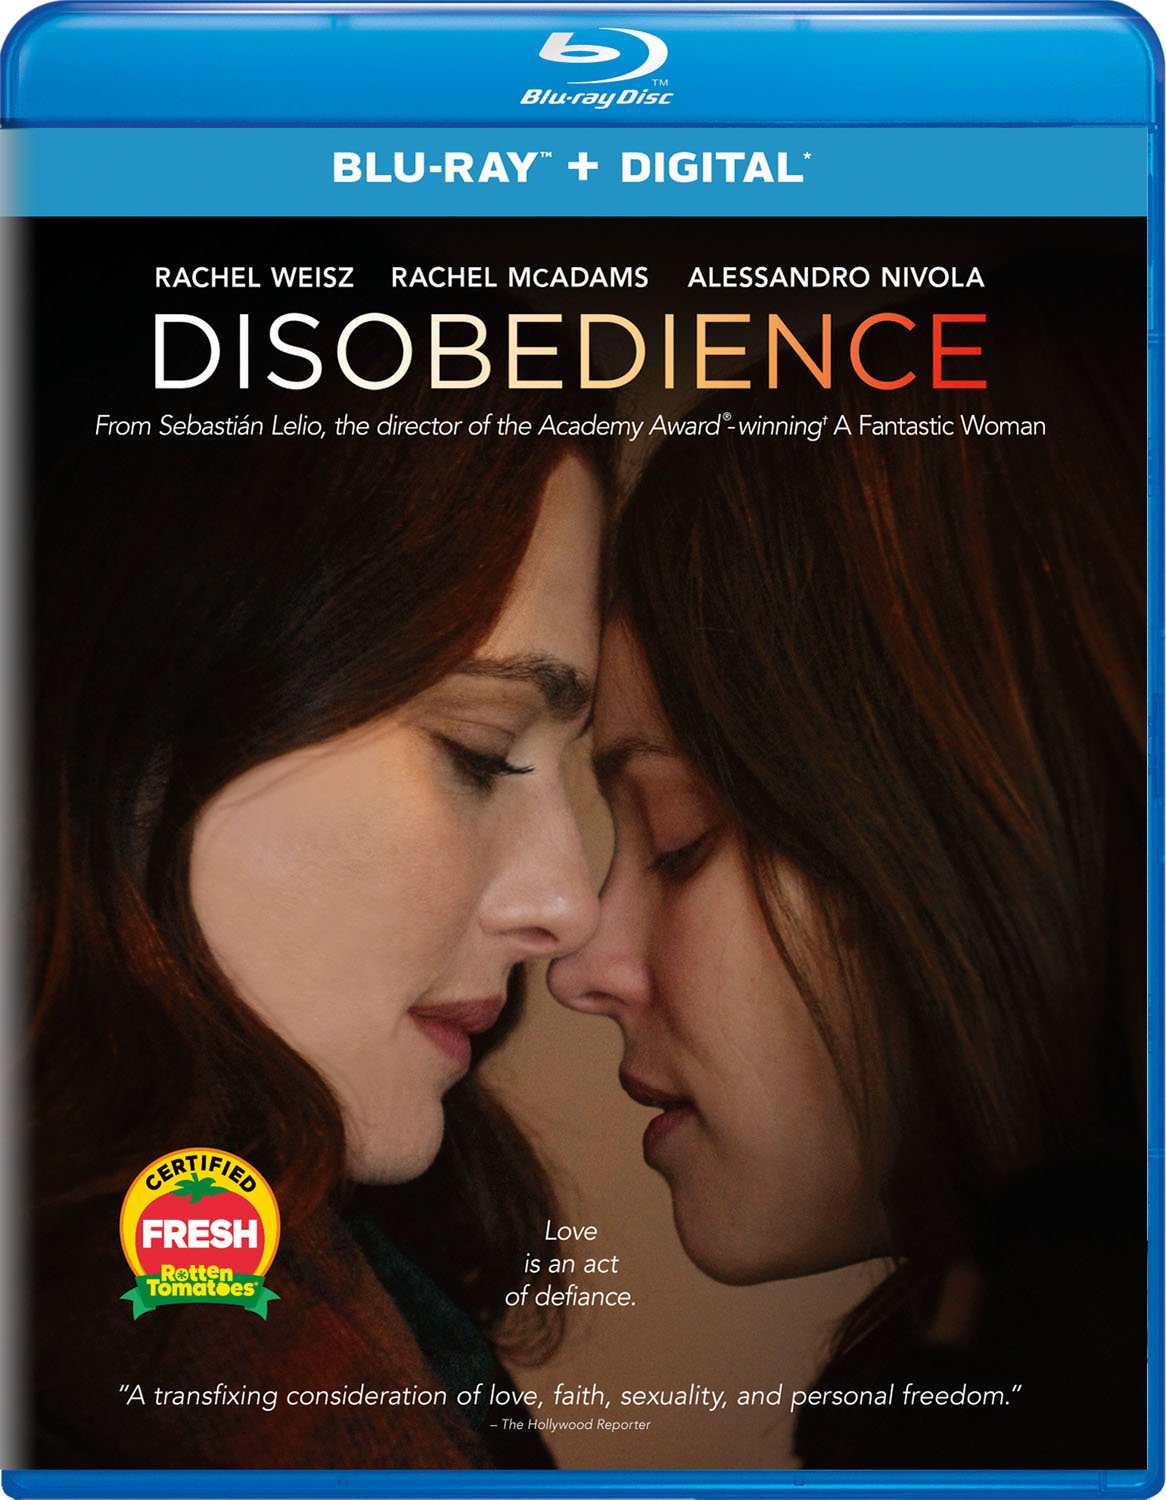 2017 Disobedience